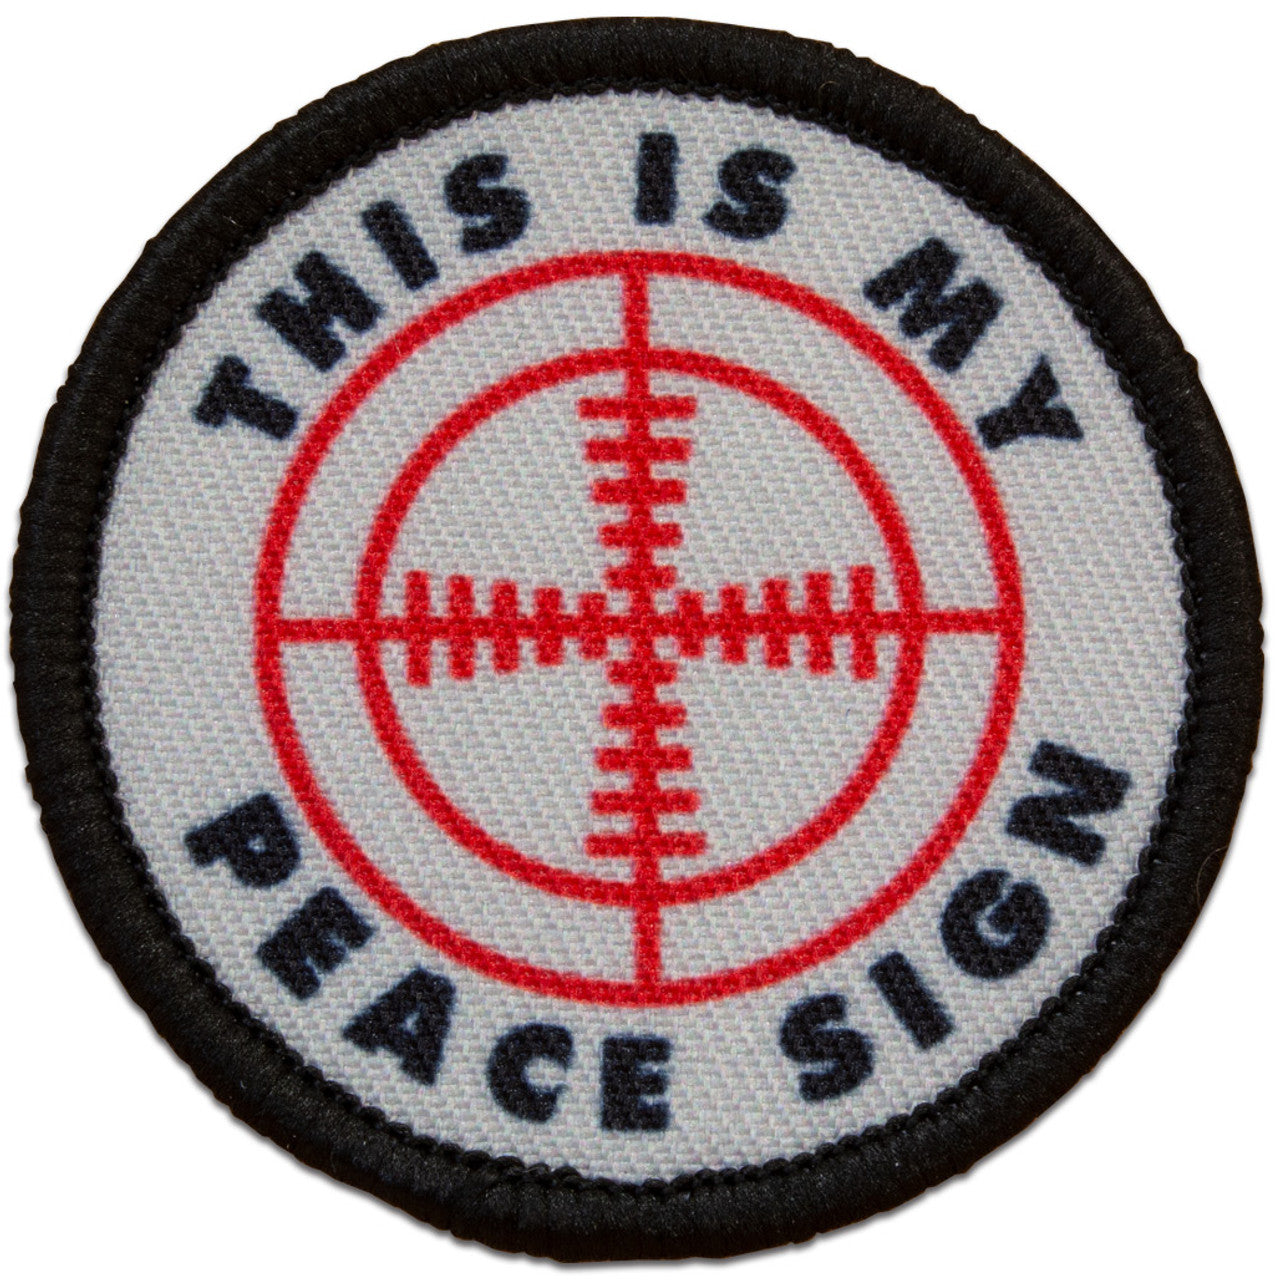 "THIS IS MY PEACE MY SIGN" MORALE PATCH